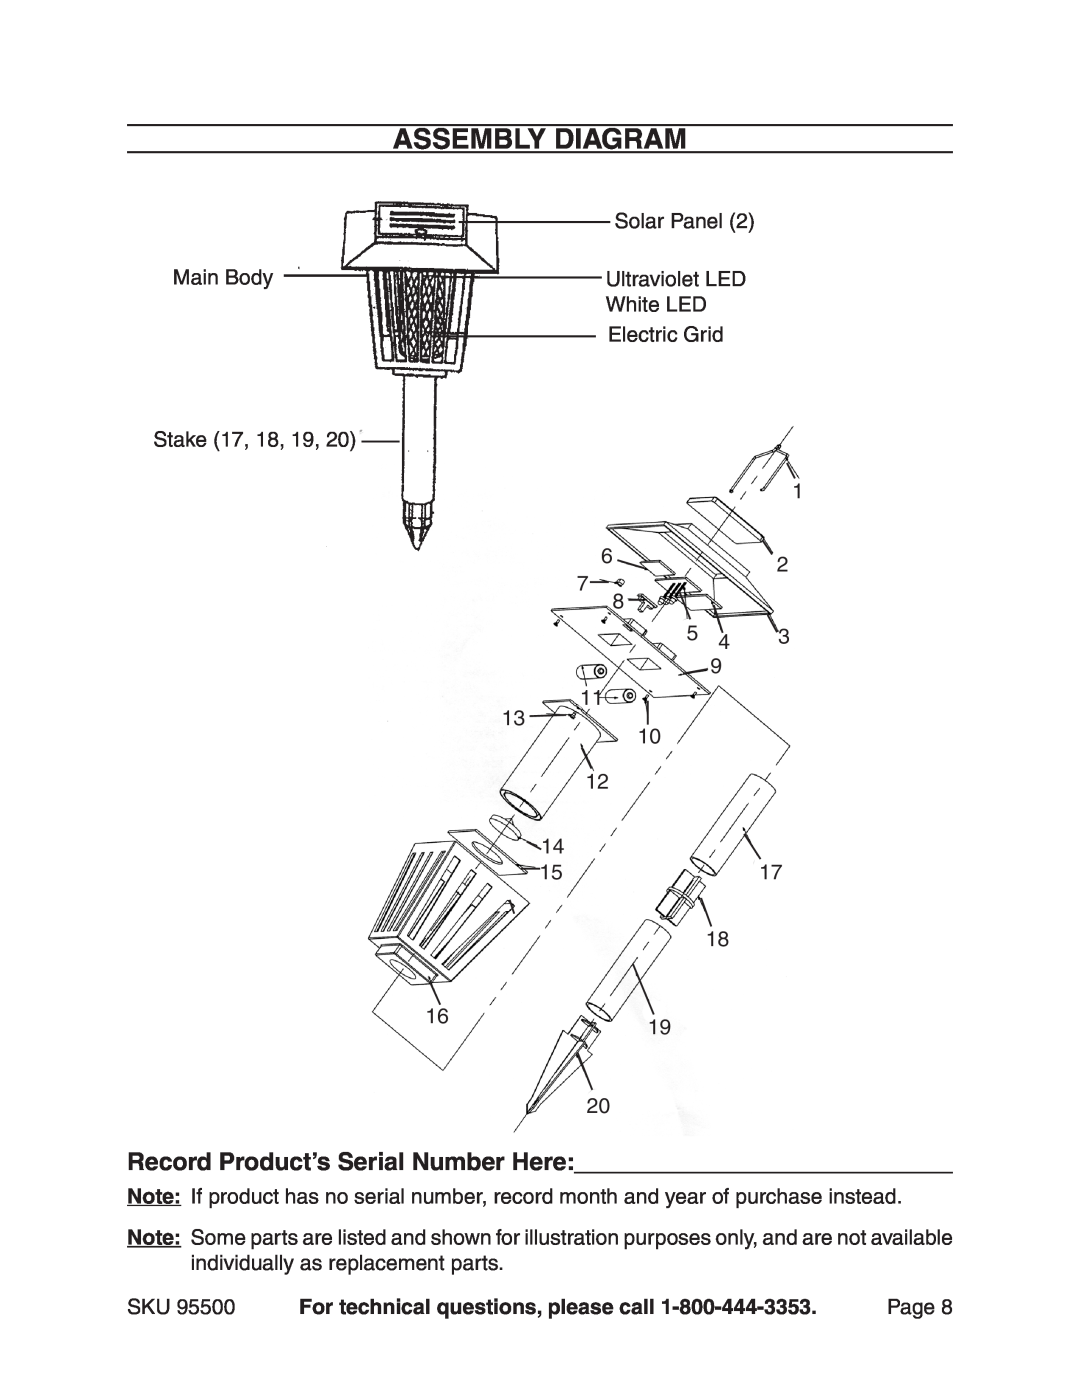 Harbor Freight Tools 95500 Assembly Diagram, Record Product’s Serial Number Here, For technical questions, please call 